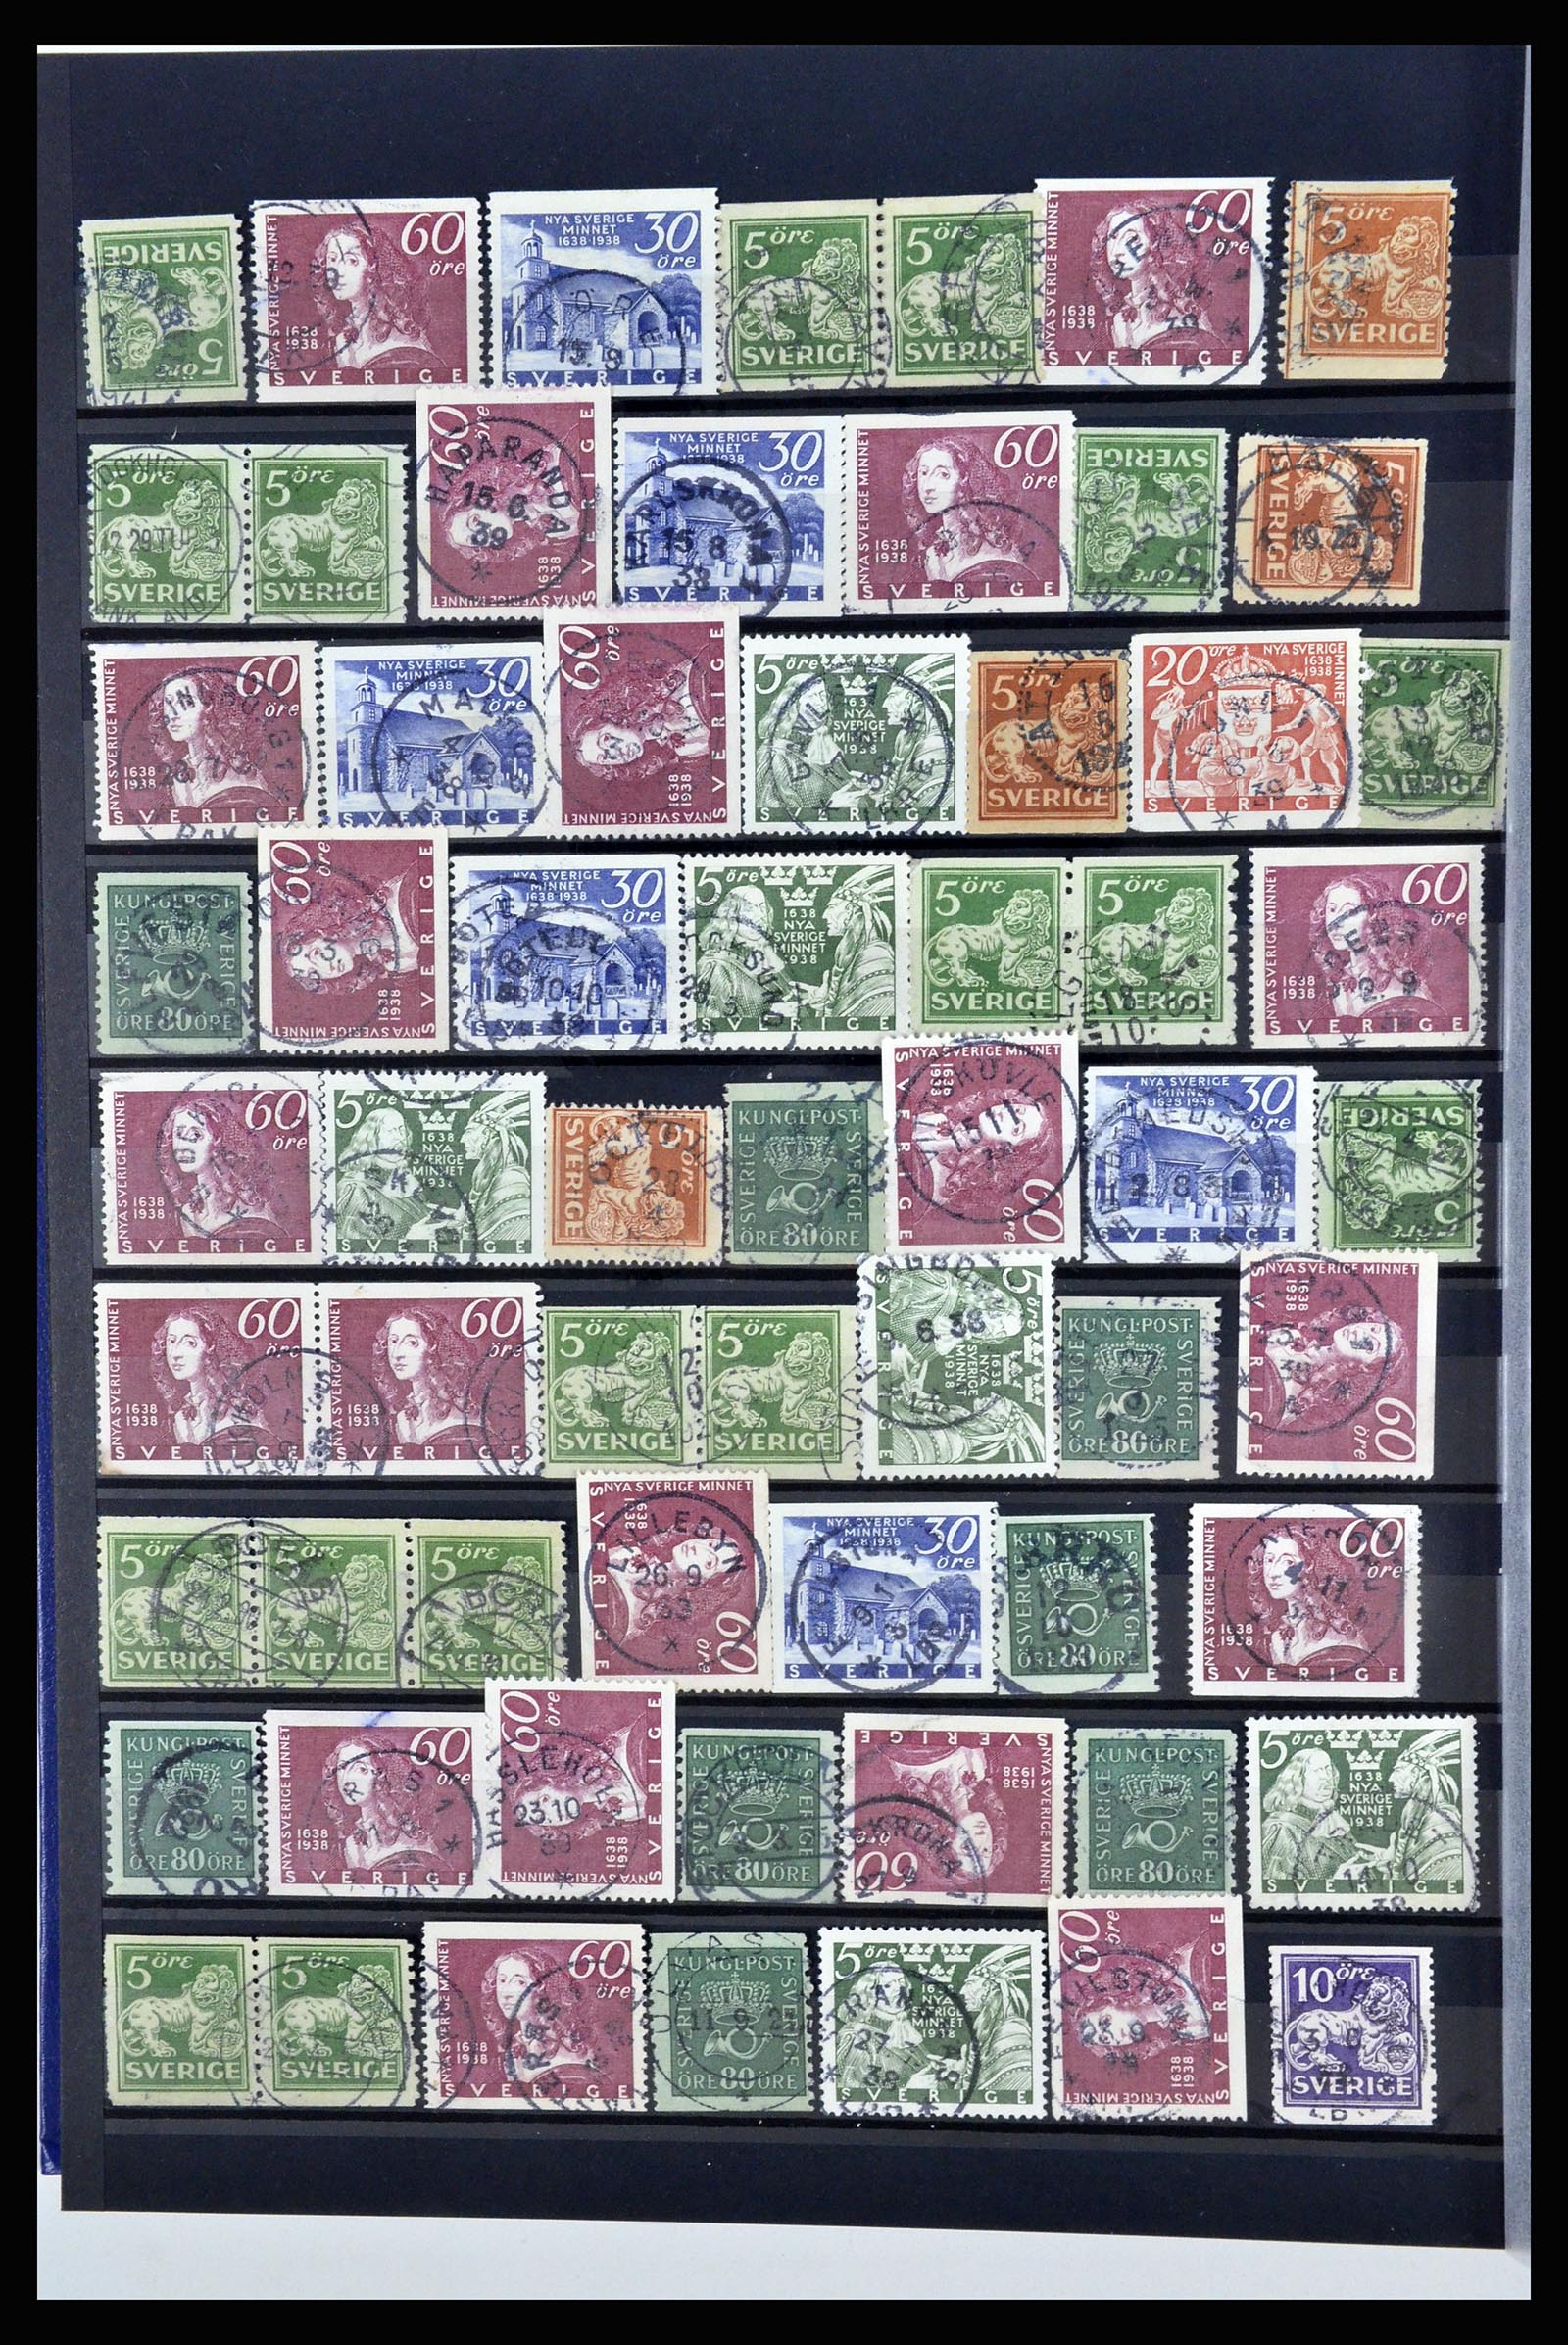 36316 056 - Stamp collection 36316 Sweden cancellations 1920-1938.